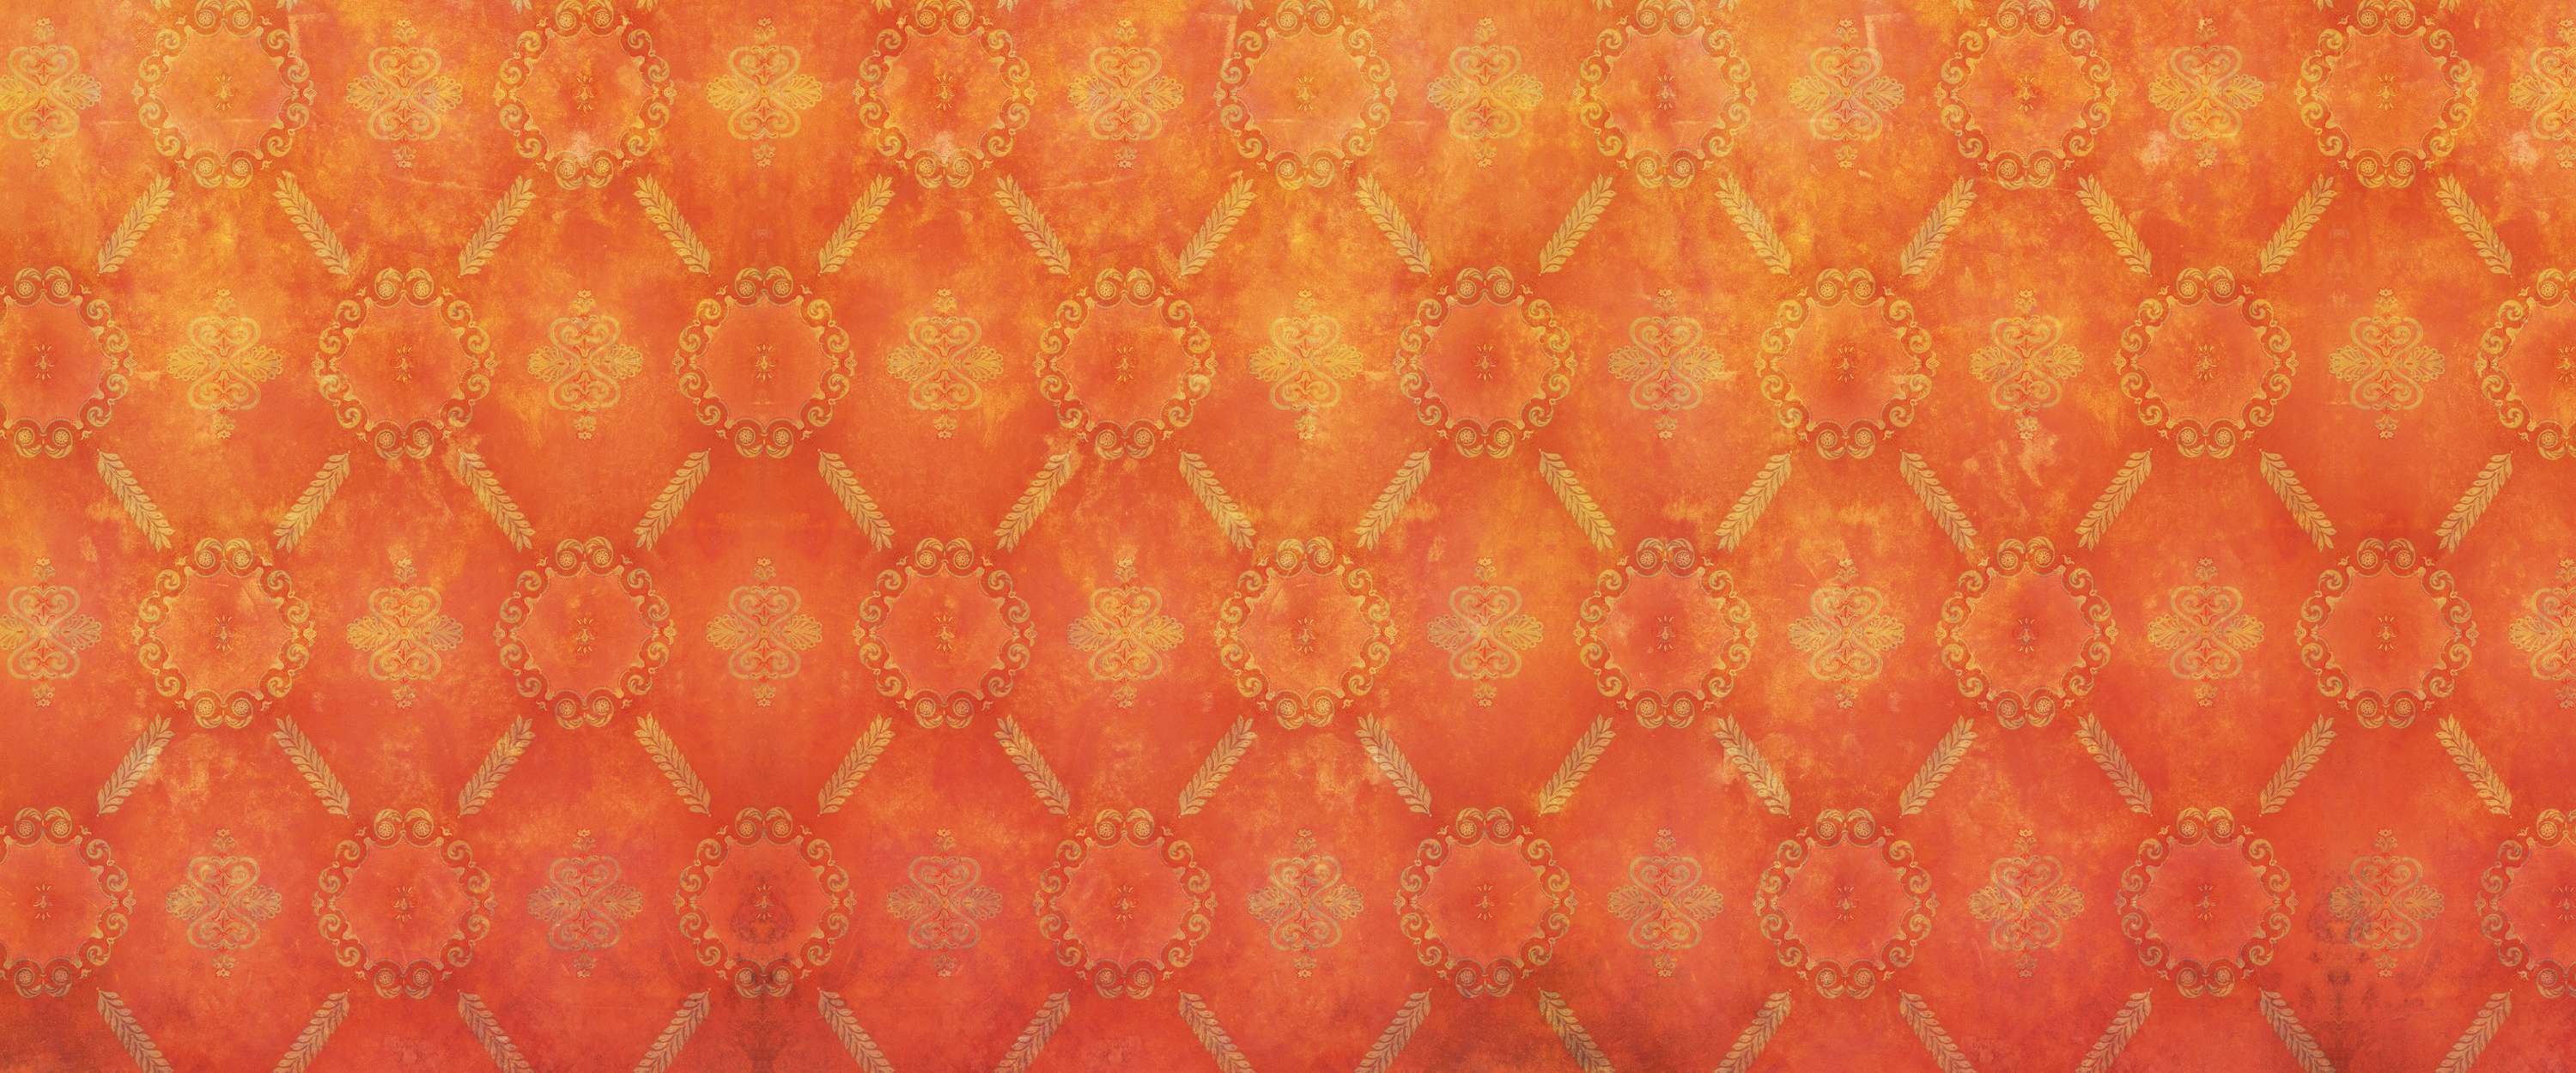             Orange mural with ornament pattern & used look
        